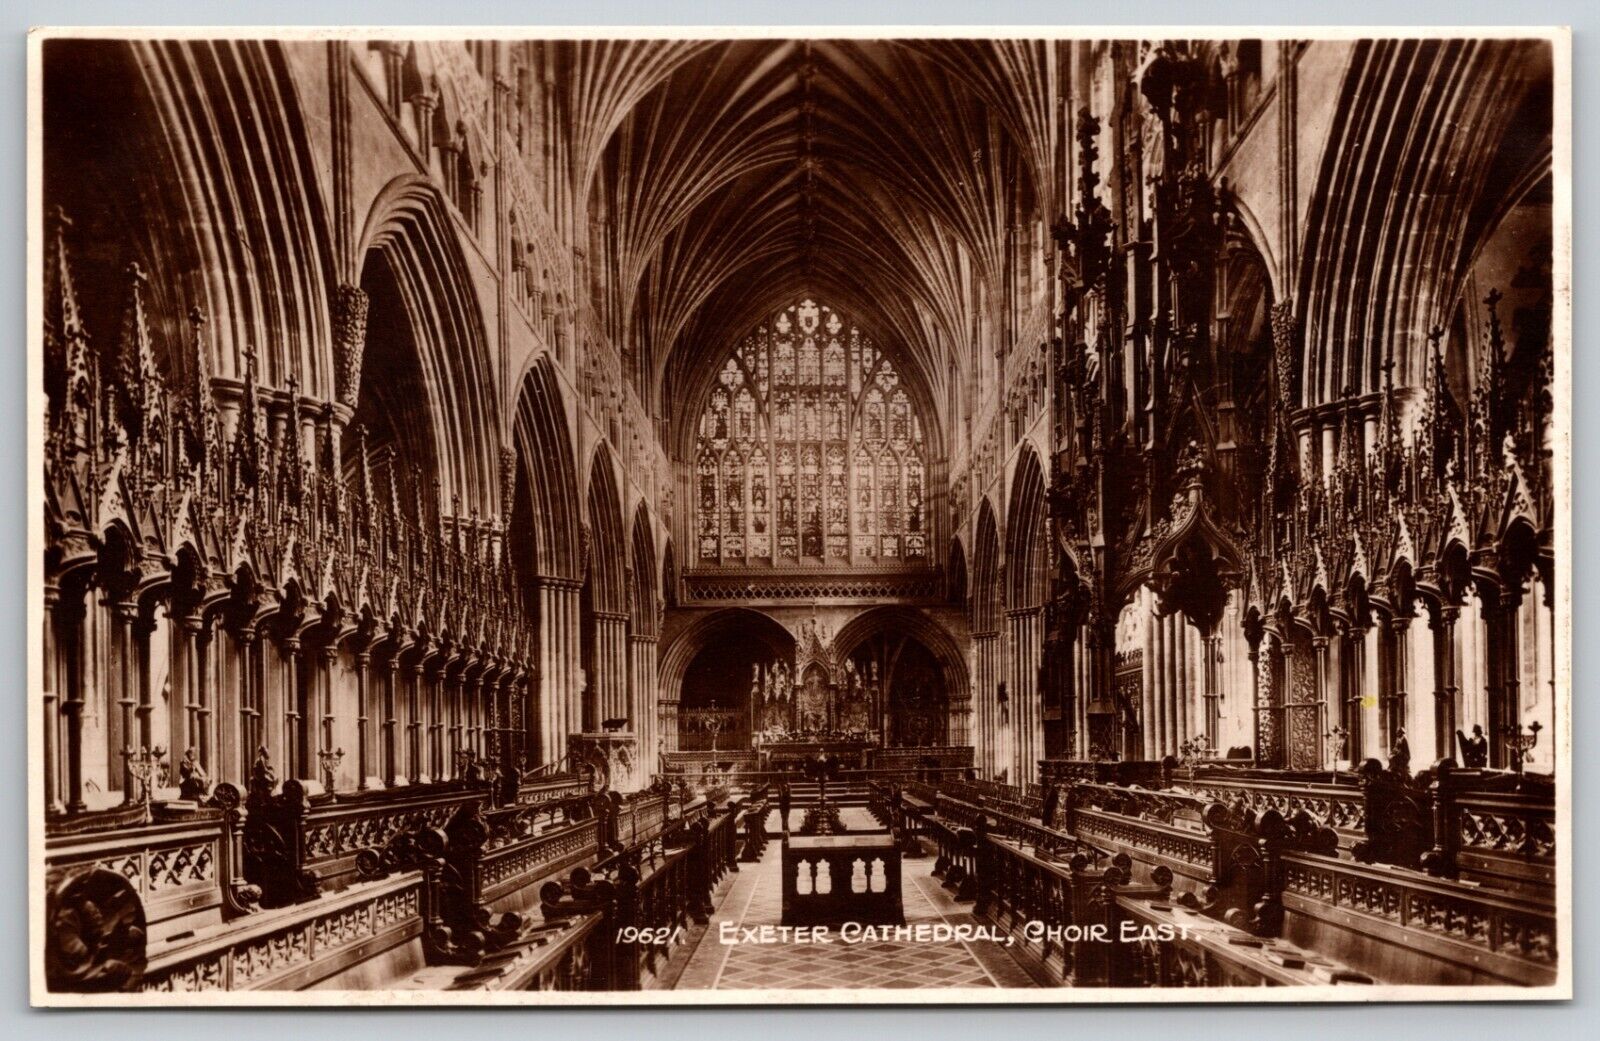 Exeter Cathedral England - Choir East - Frith\'s Series No 19621 - Postcard